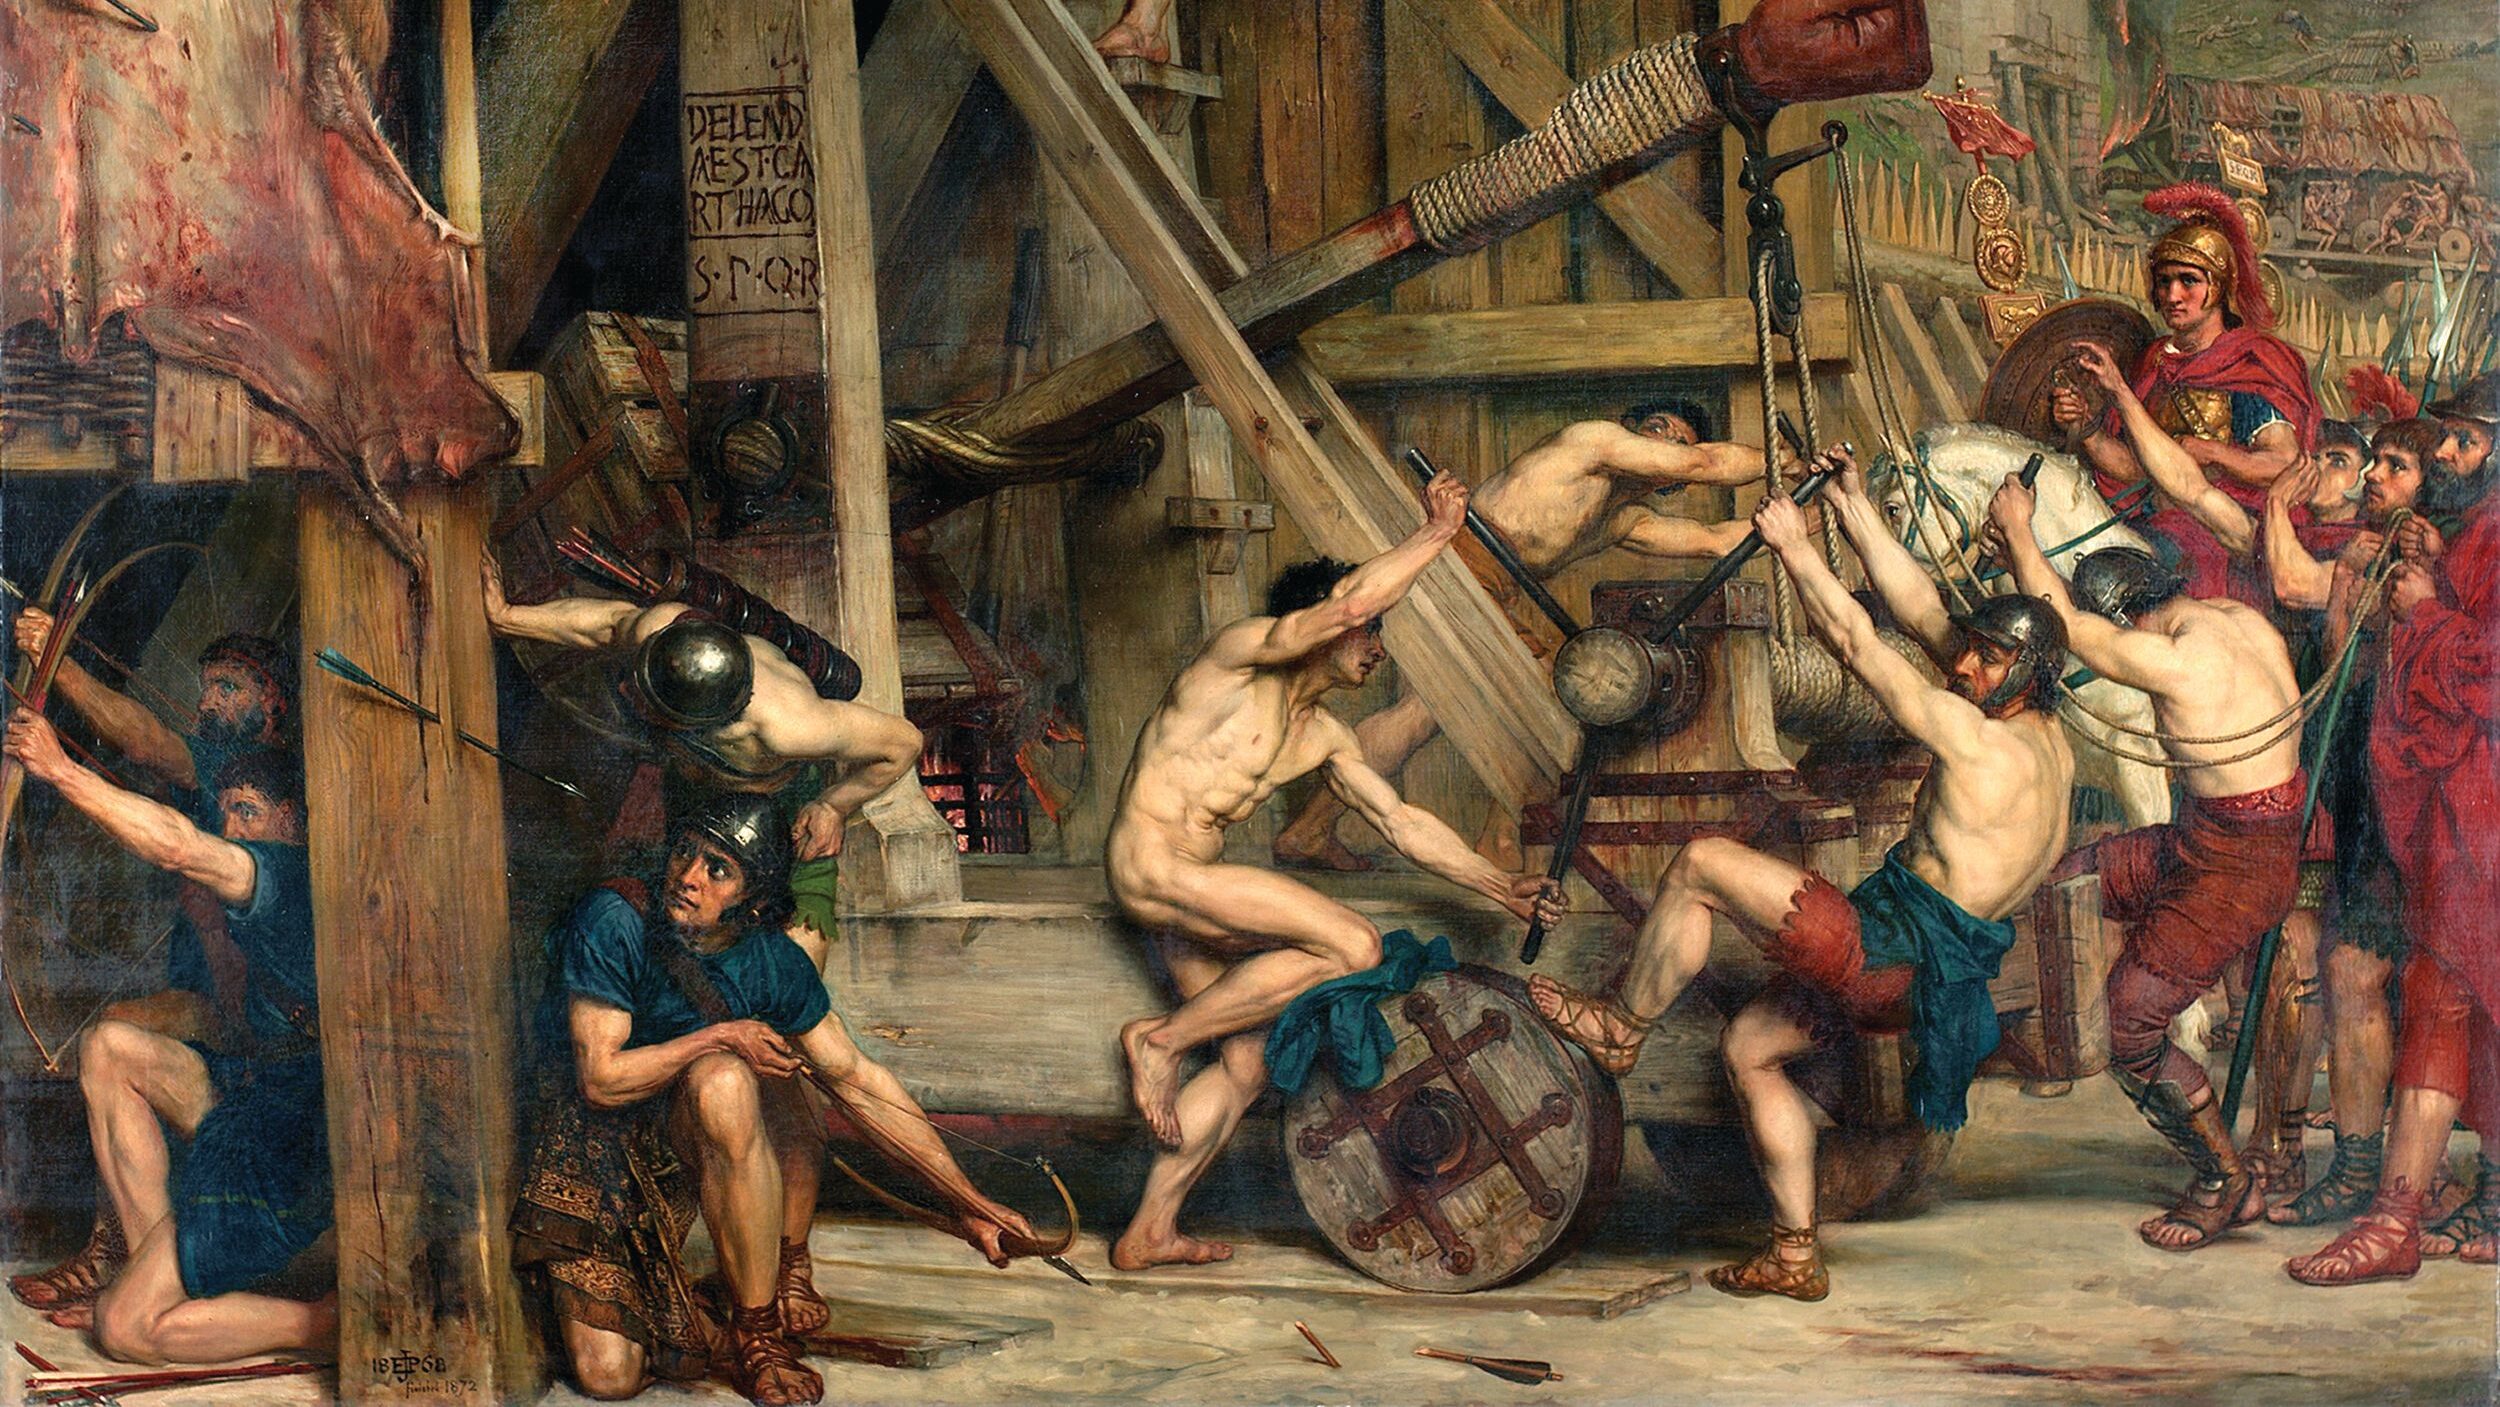 “The Catapult,” by Edward John Poynter (British, 1836-1919) depicts a siege engine manned by Roman soldiers at the walls of Carthage during the Third Punic War. “Carthage must be destroyed” (Delenda est Carthago), the words of Cato the Elder as quoted in Pultarch's “Life of Cato,” are carved on one of its massive beams.